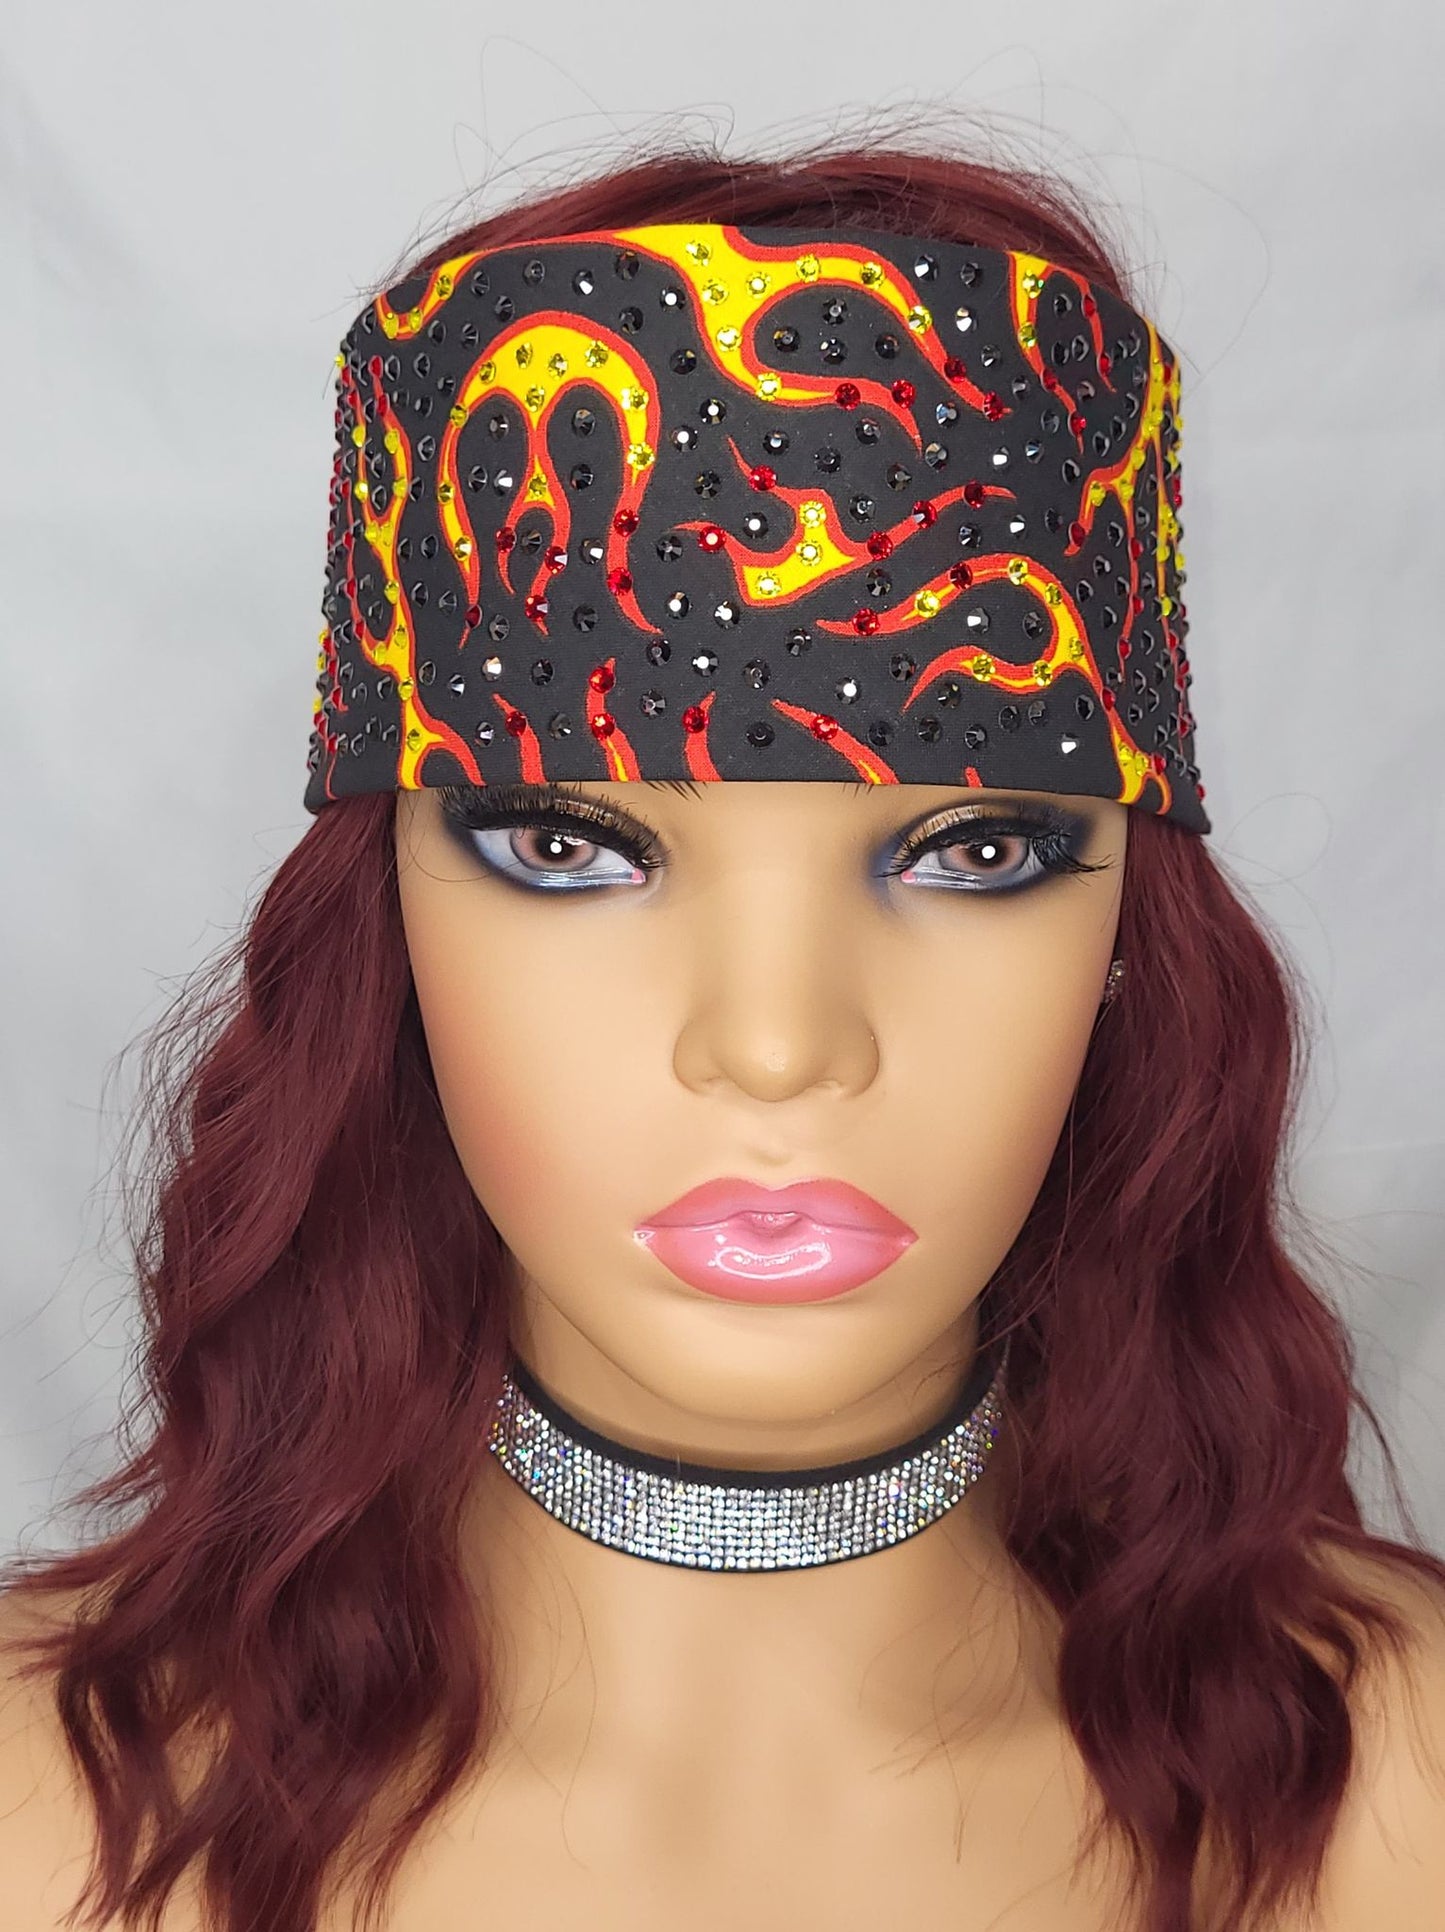 LeeAnnette Flames with Black, Red and Yellow Austrian Crystals (4991)